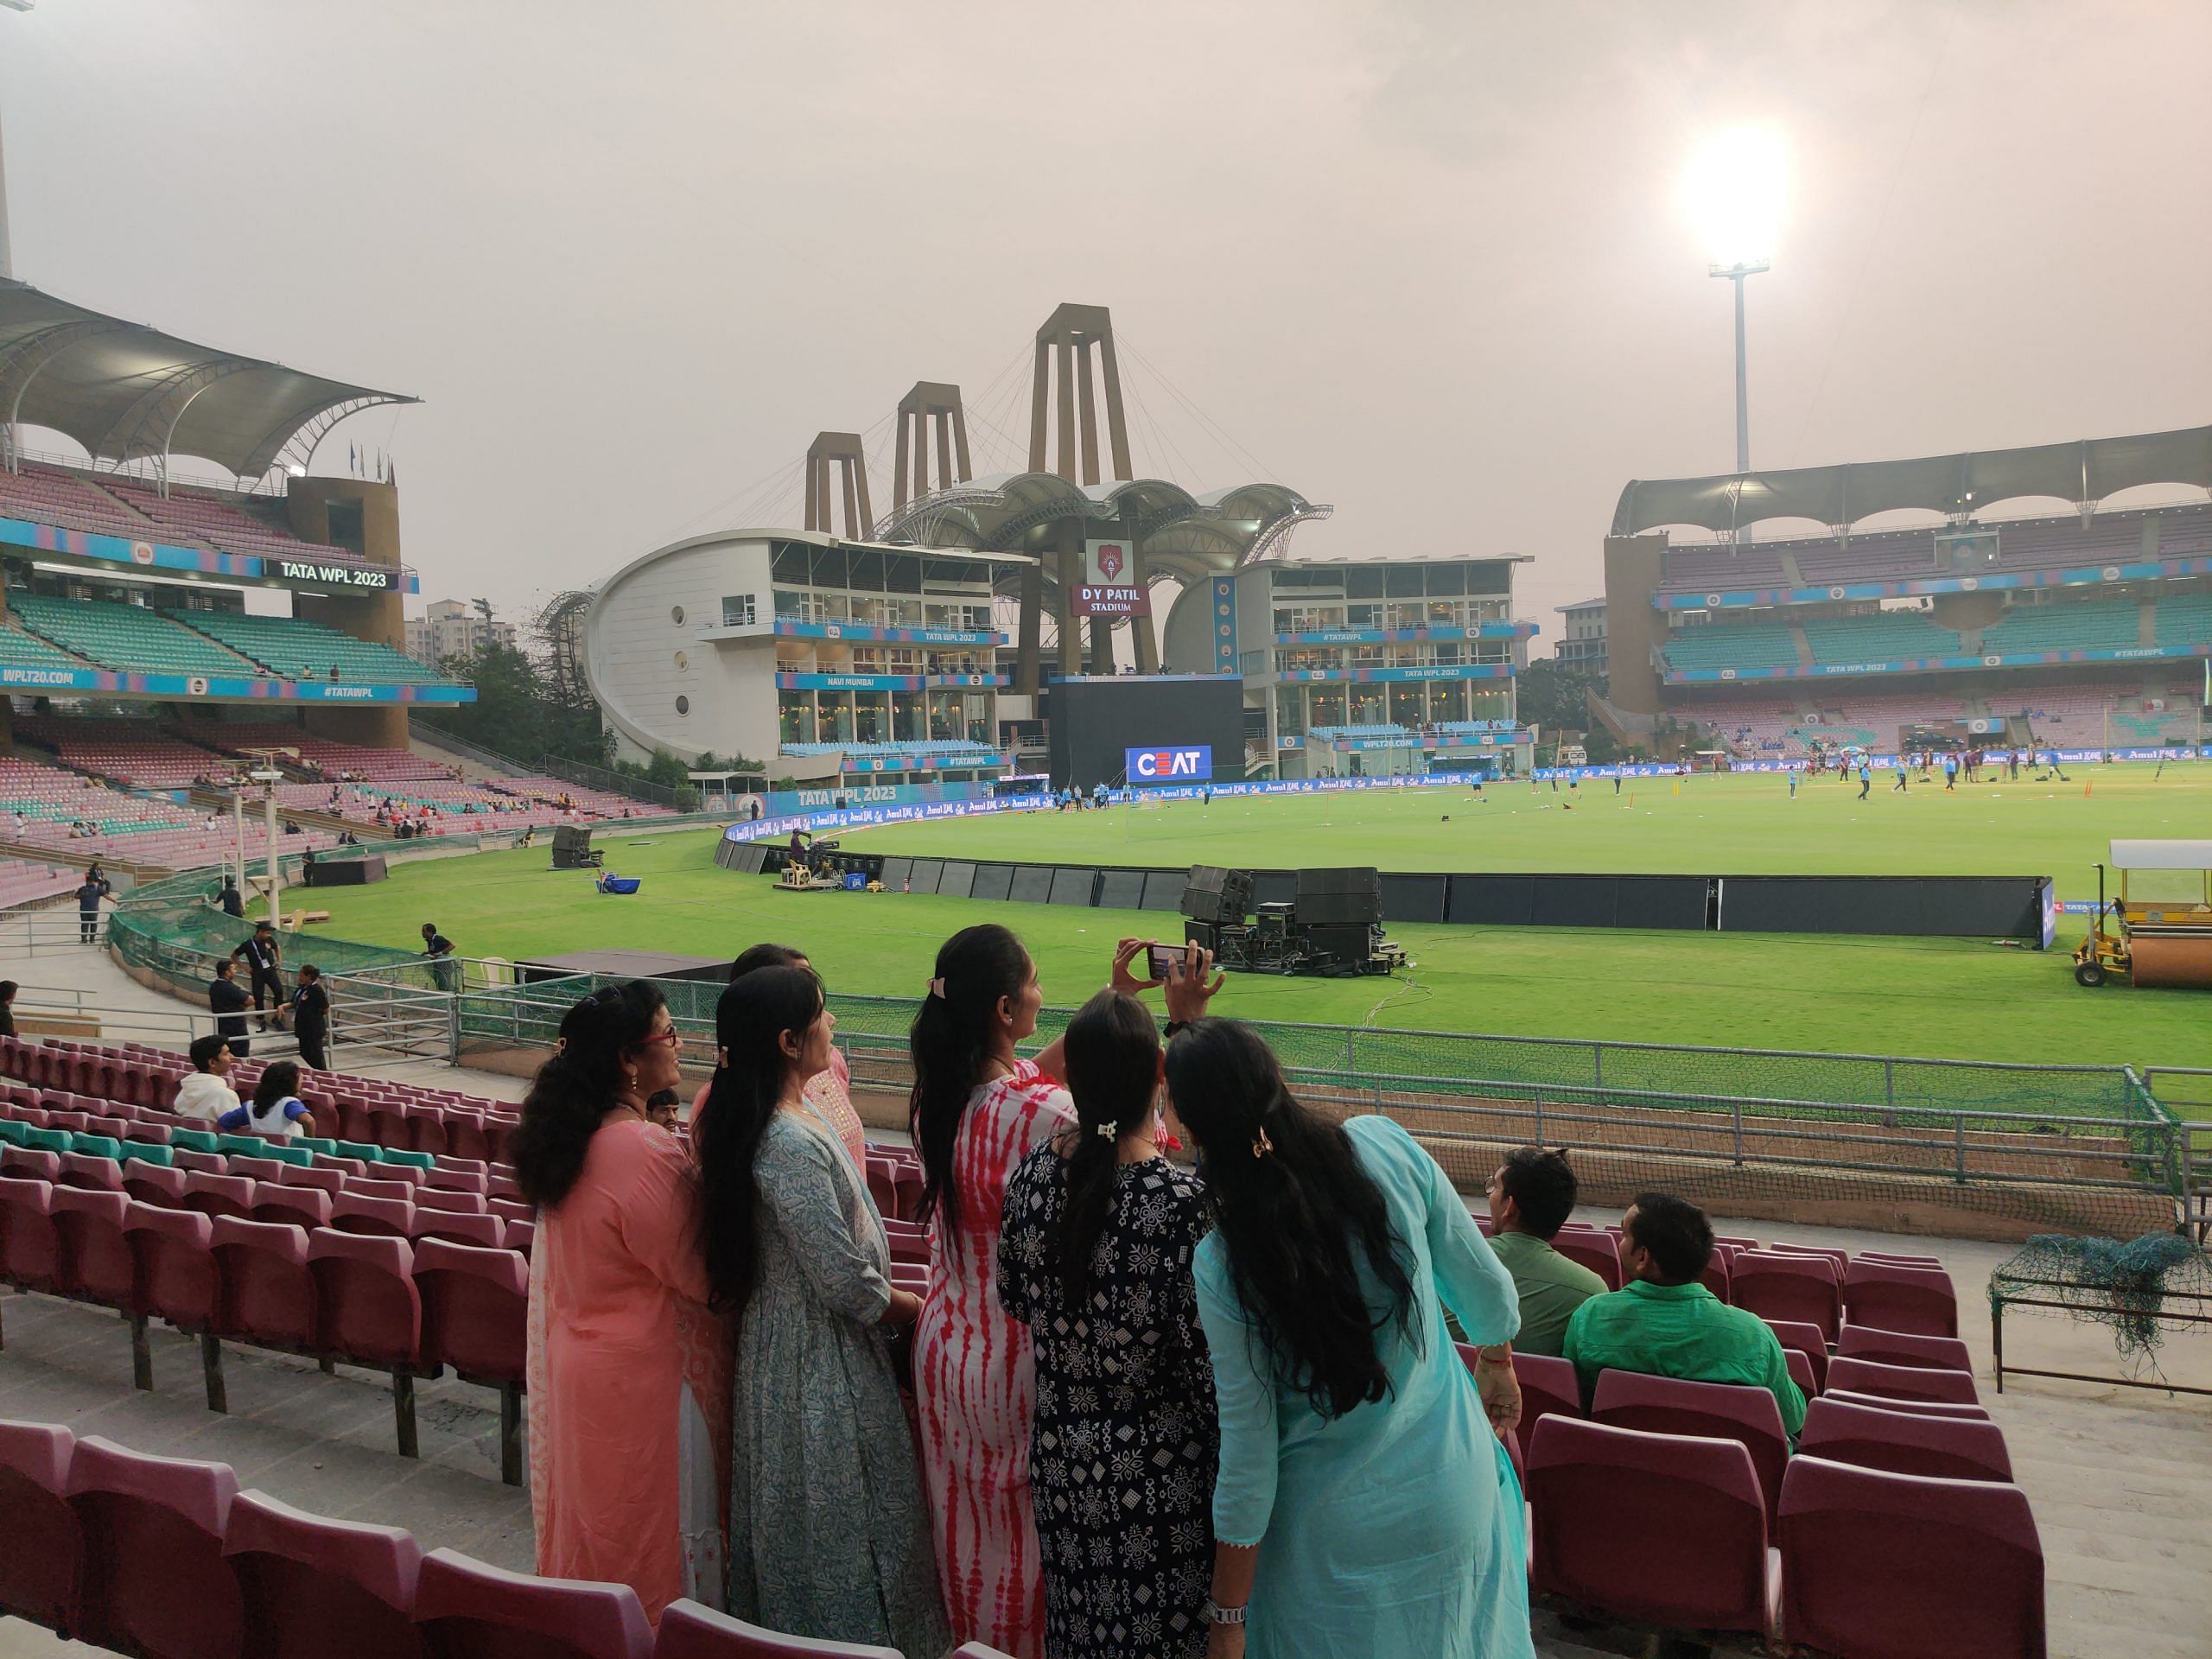 As a group of women arrived early for DC vs RCB match, they made the most of it by clicking selfies at DY Patil Stadium on 13 March | Nidhima Taneja | ThePrint